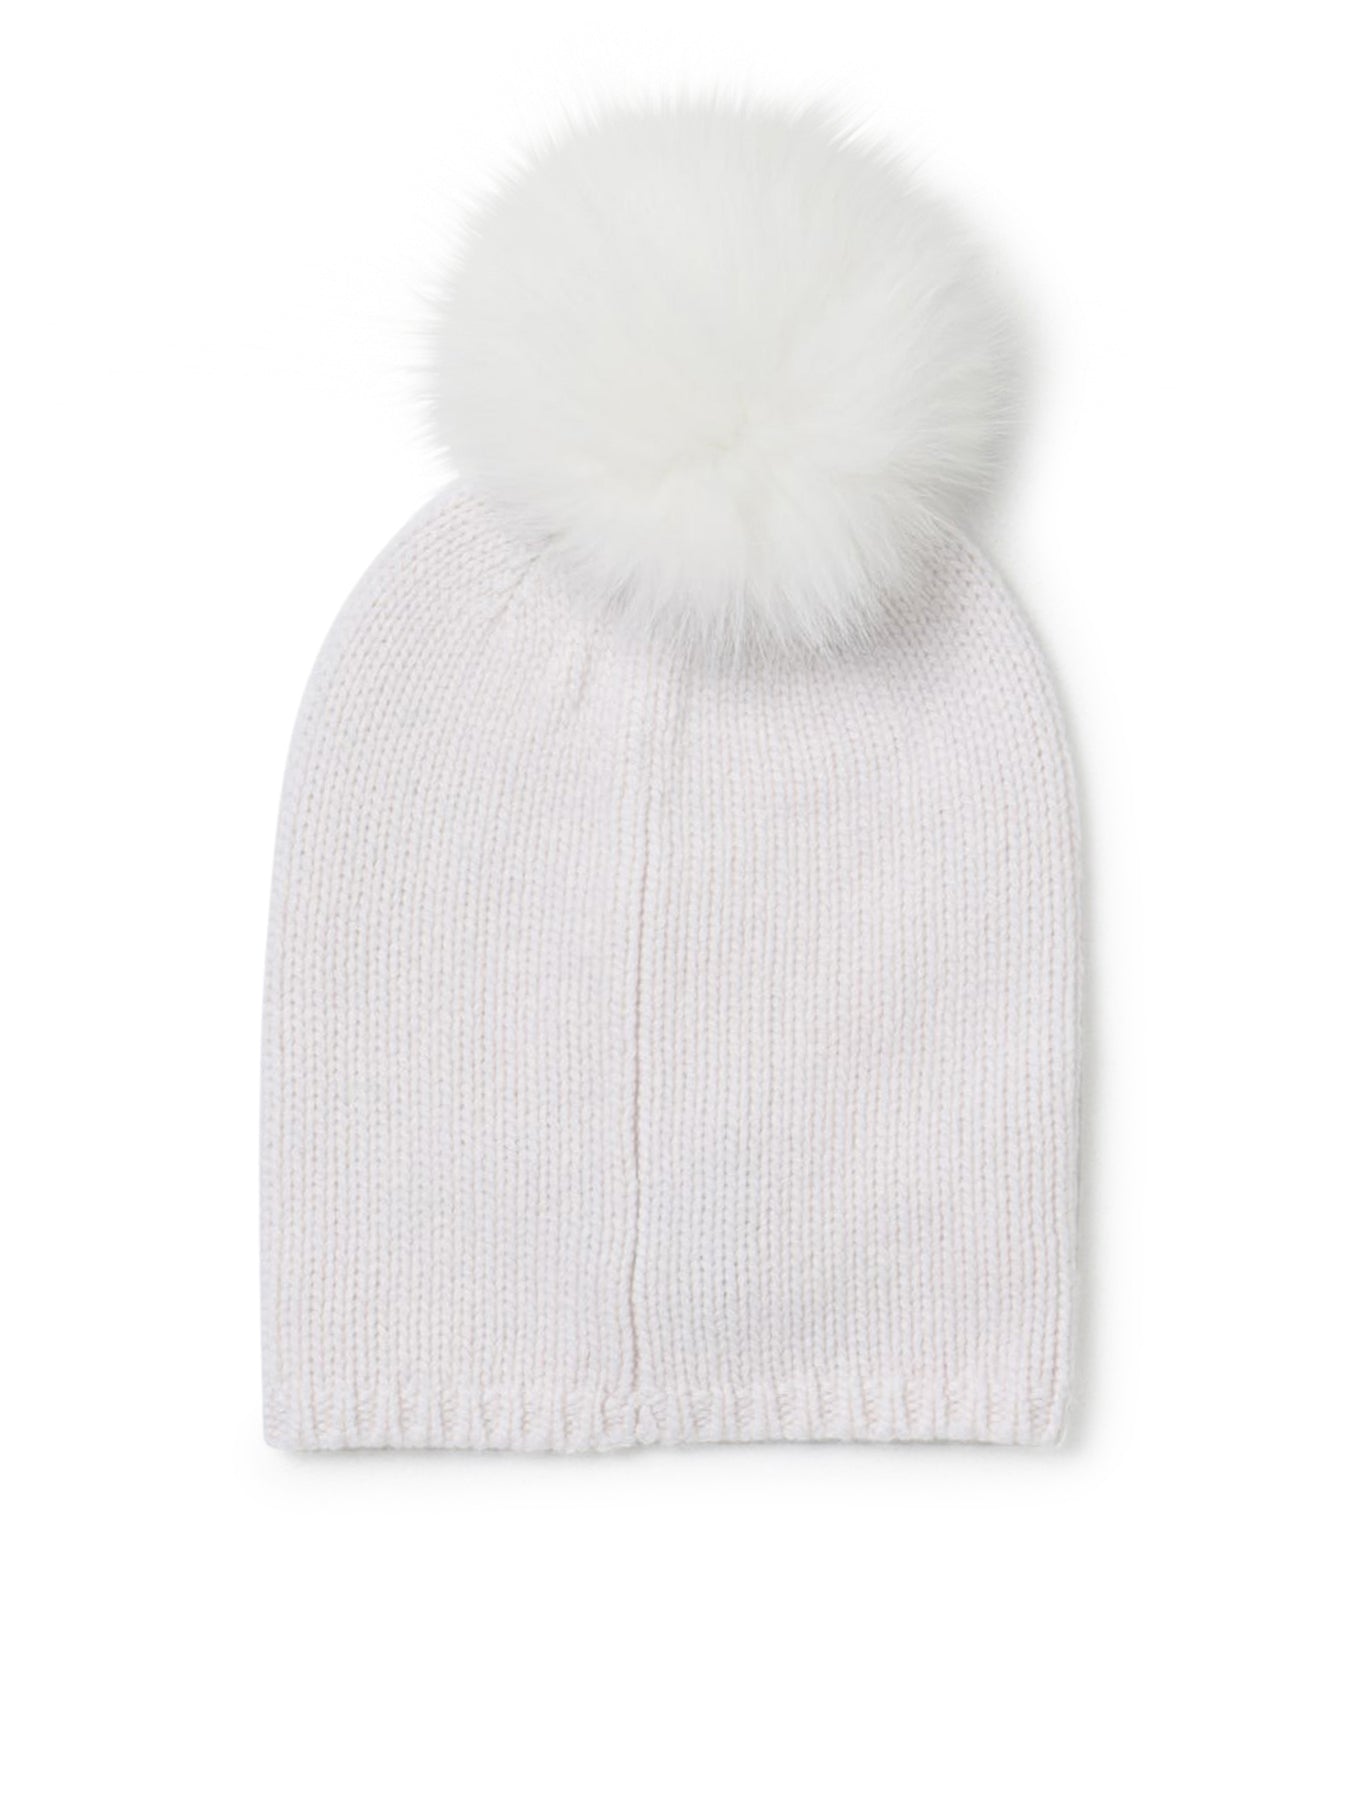 Max Mara hat in cashmere with pompon